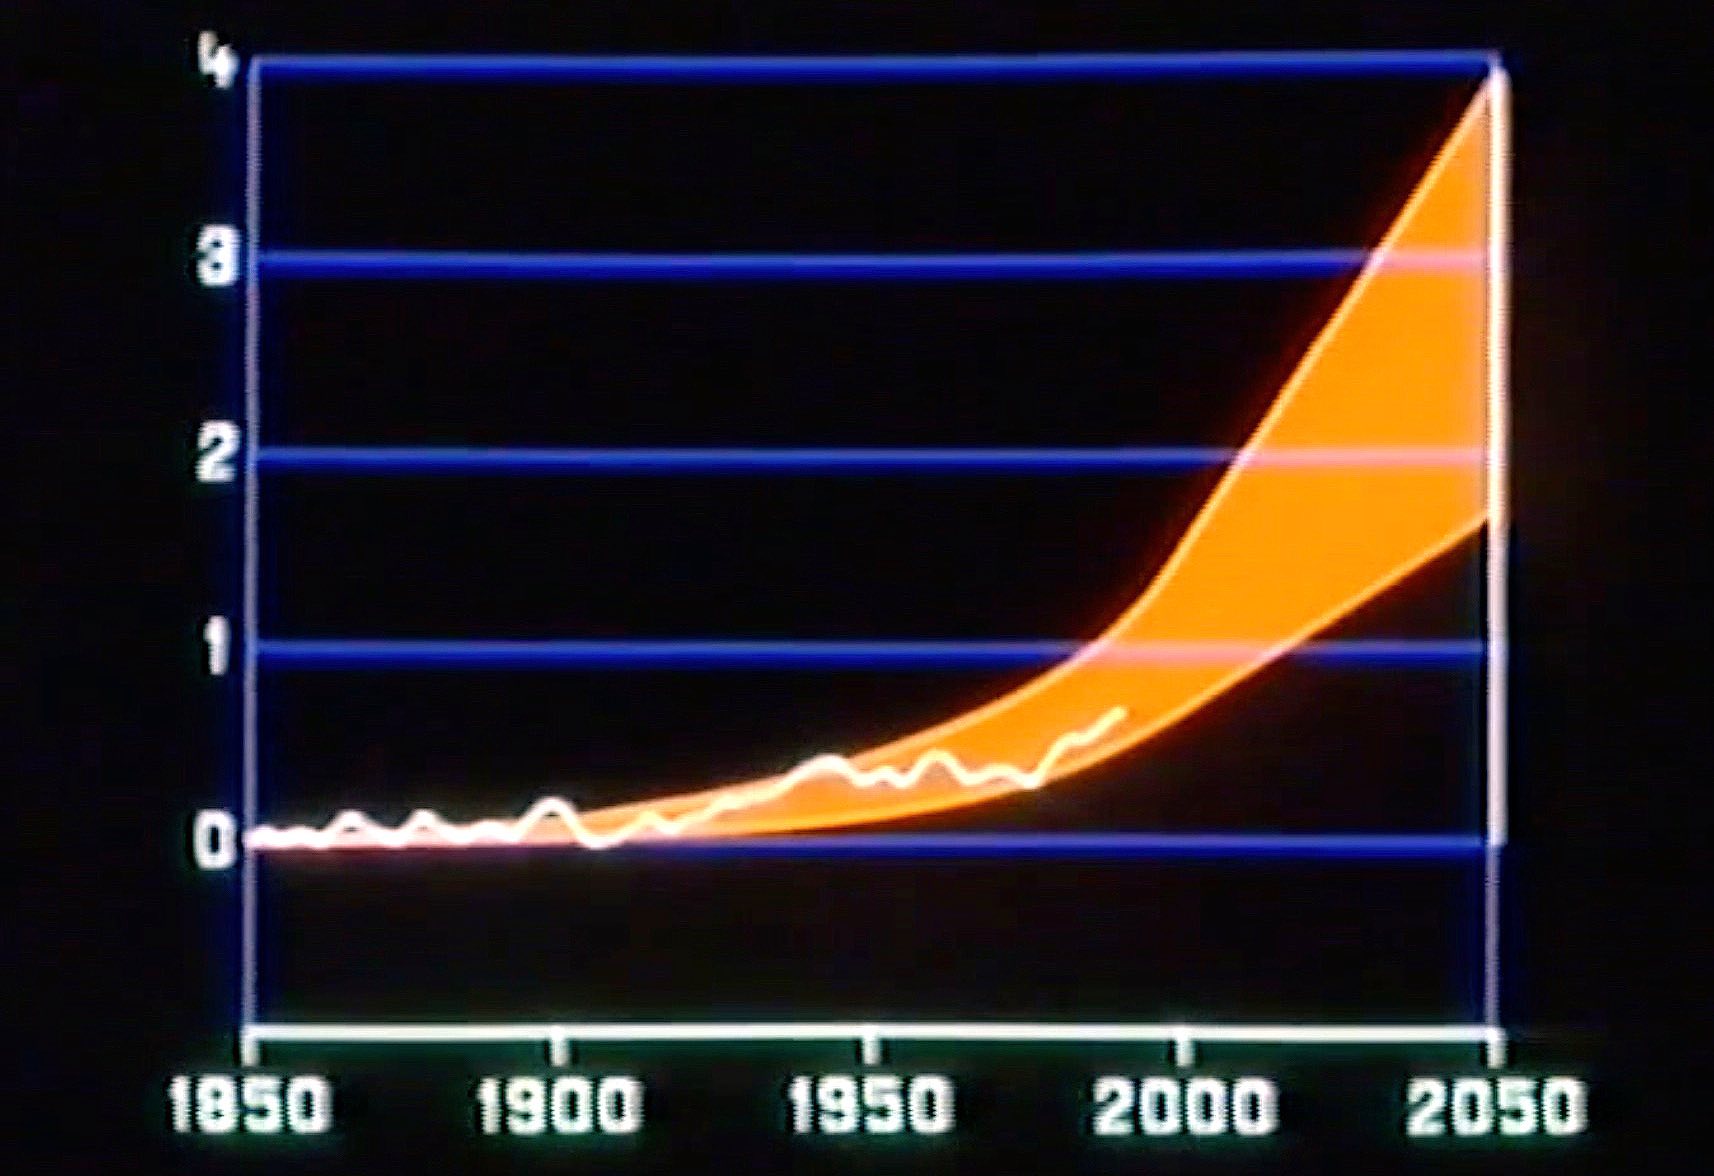 The projections for future global warming in Shell’s 1991 film stand up “pretty well” today, according to Prof Tom Wigley.